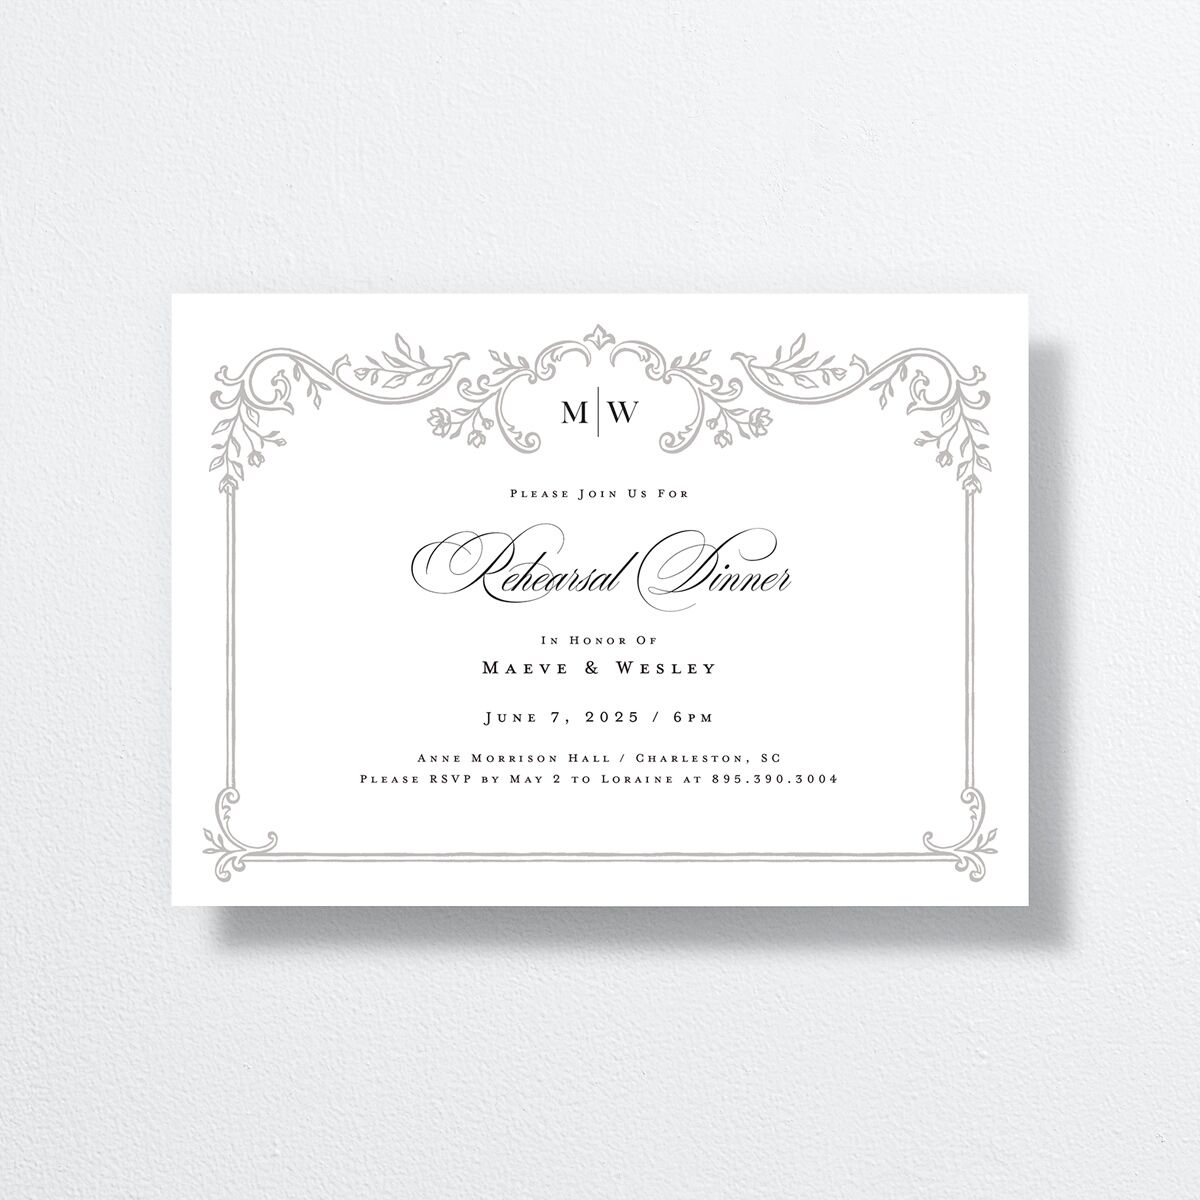 Opulences Rehearsal Dinner Invitations by Vera Wang front